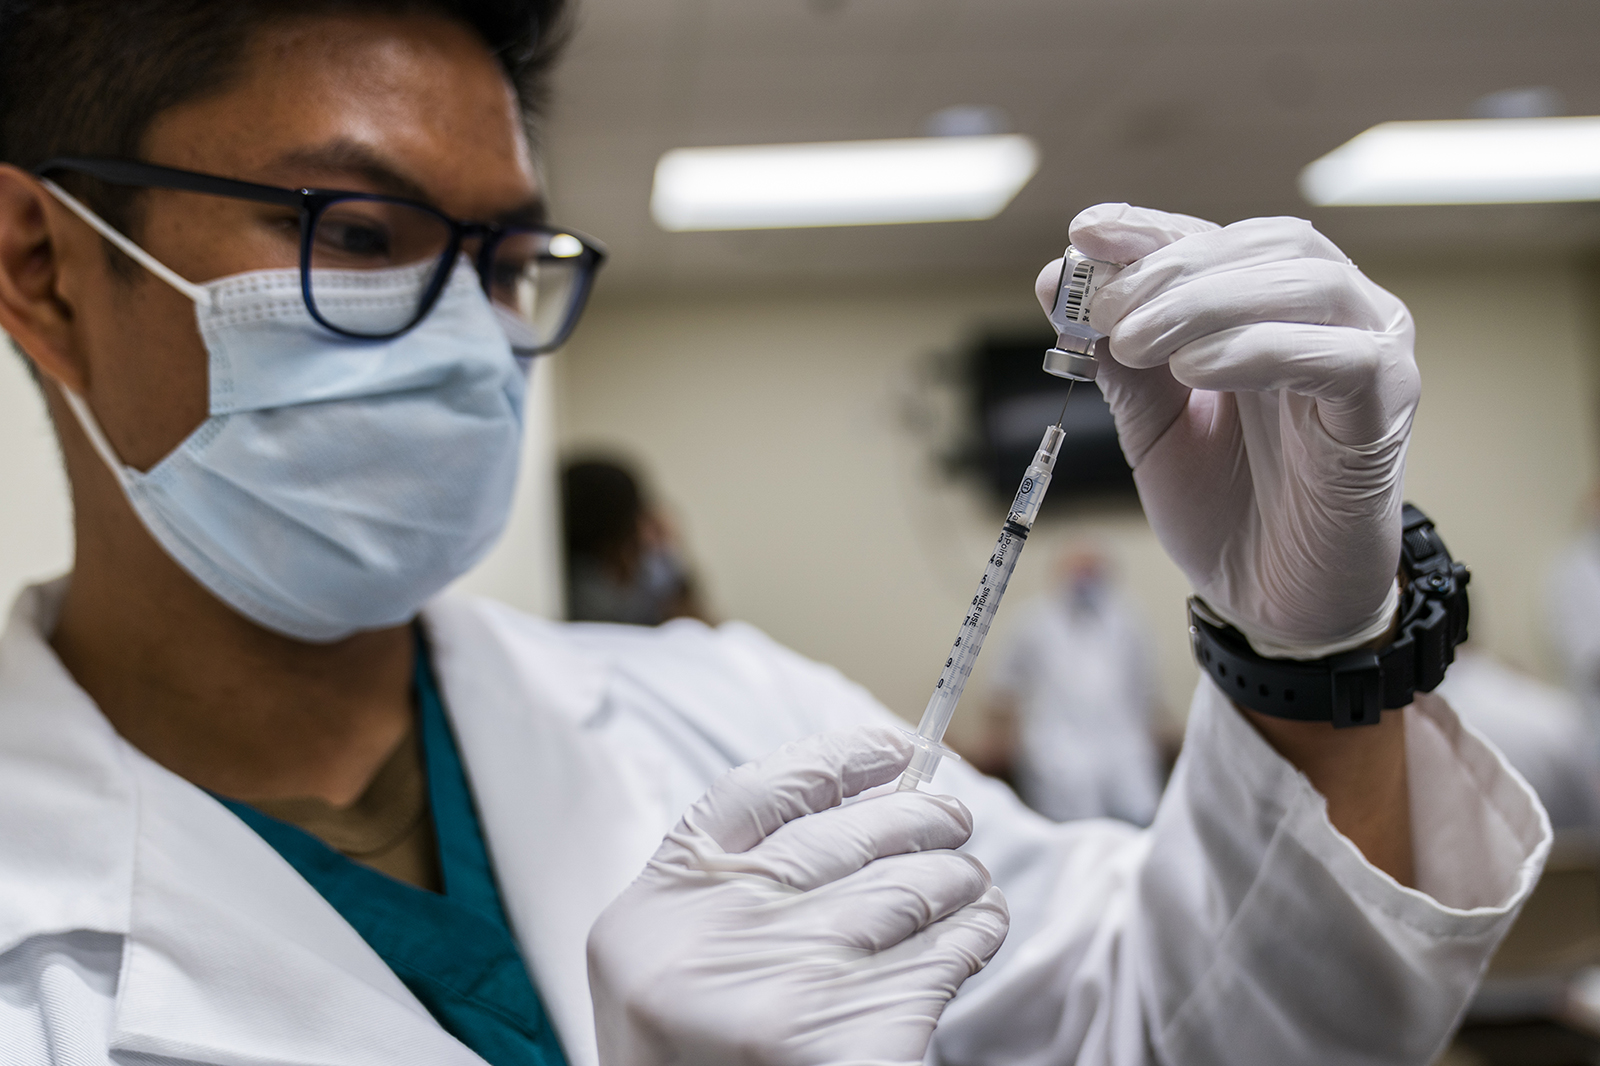 HN Milan Torres prepares a dose of Covid-19 vaccine at the Walter Reed National Military Medical Center on December 14, in Bethesda, Maryland.